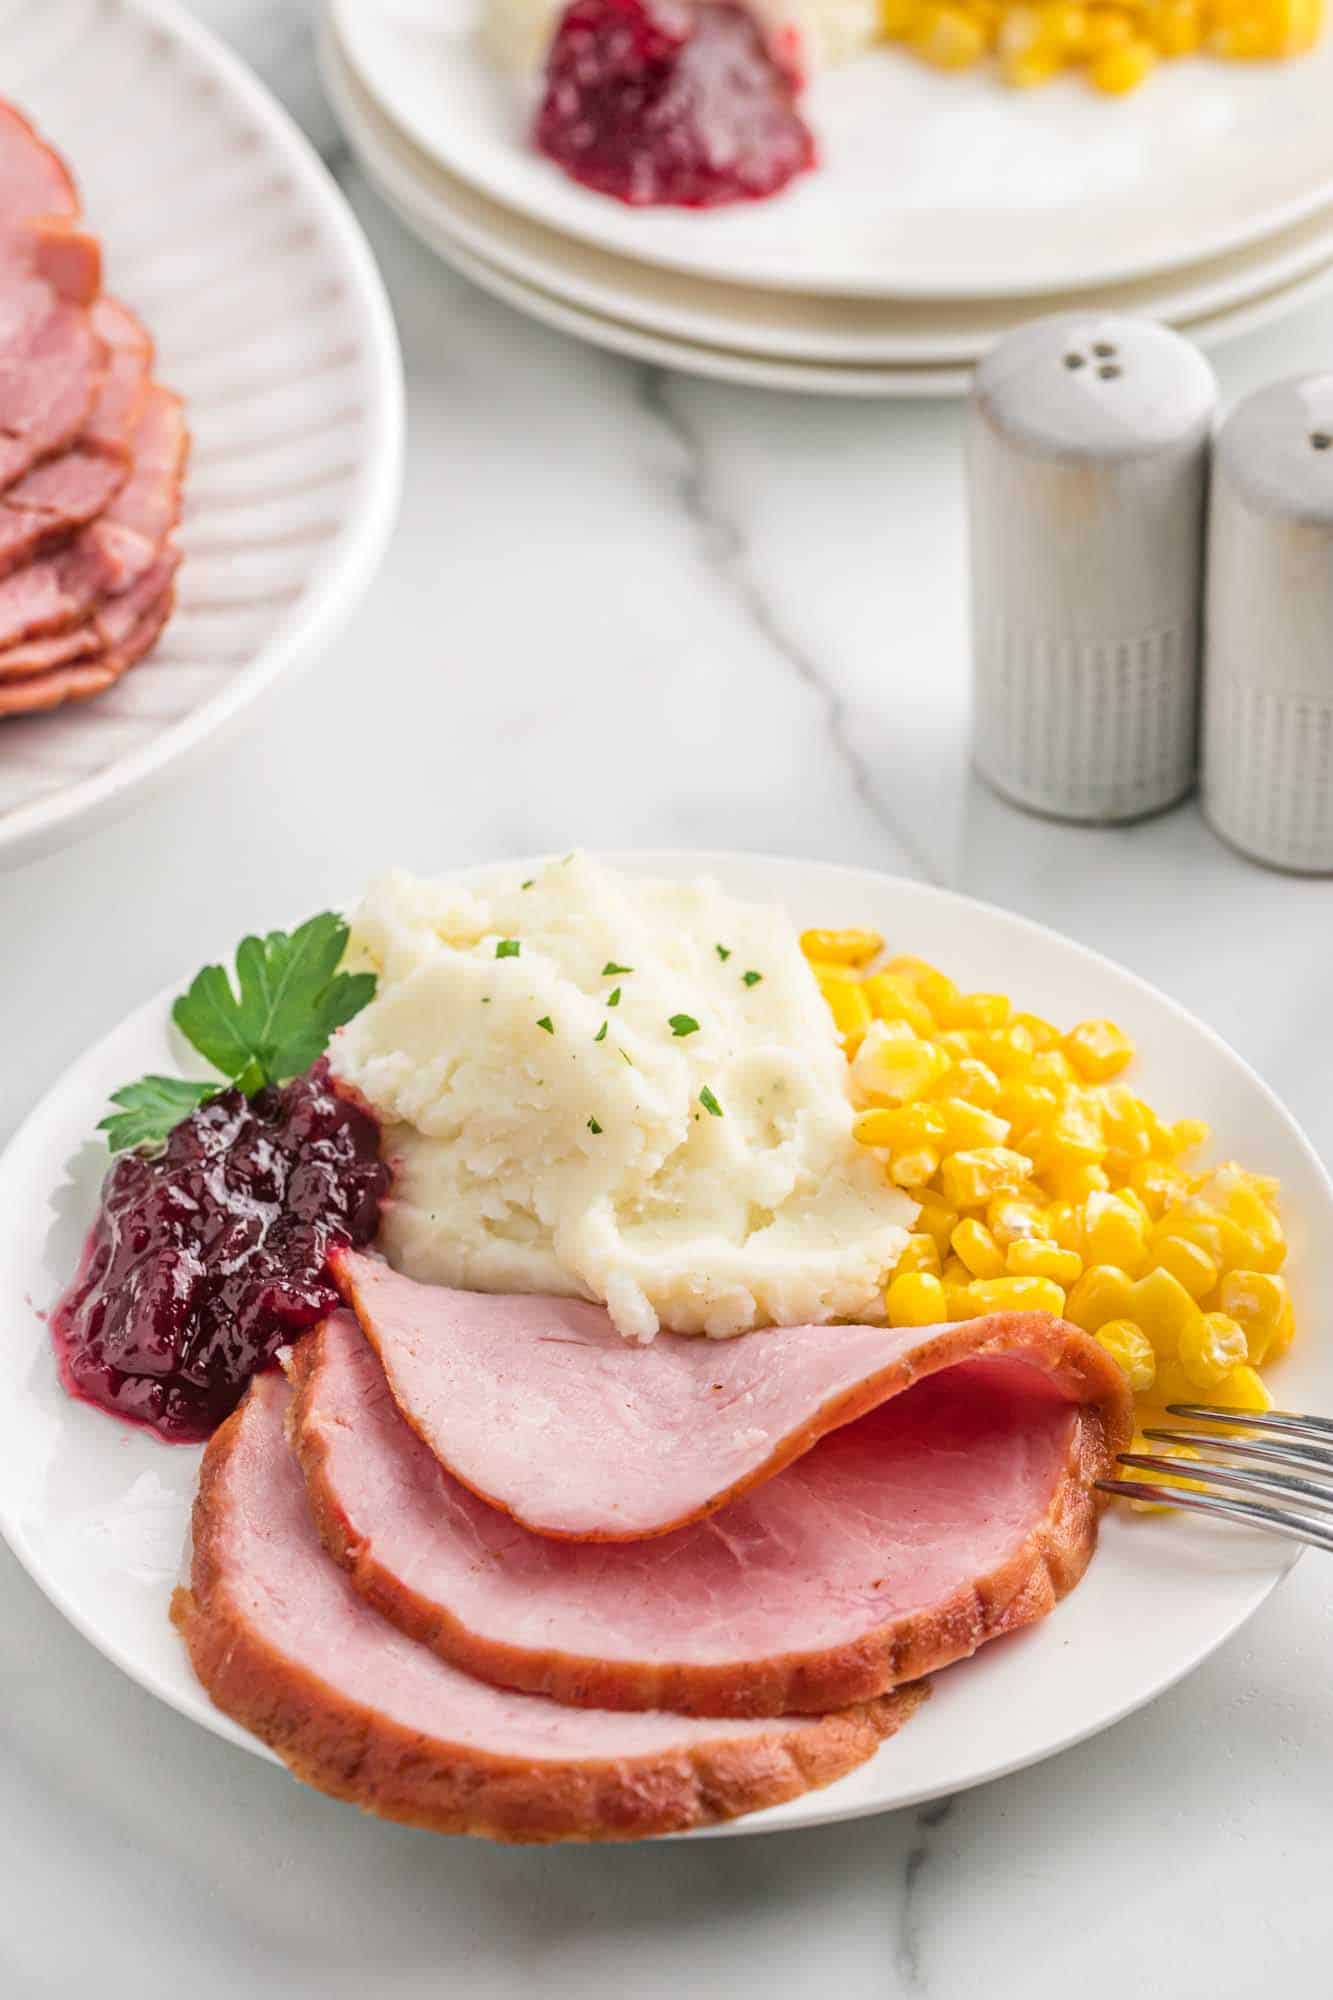 Plated pineapple ham, with mashed potatoes, corn, and cranberry sauce.